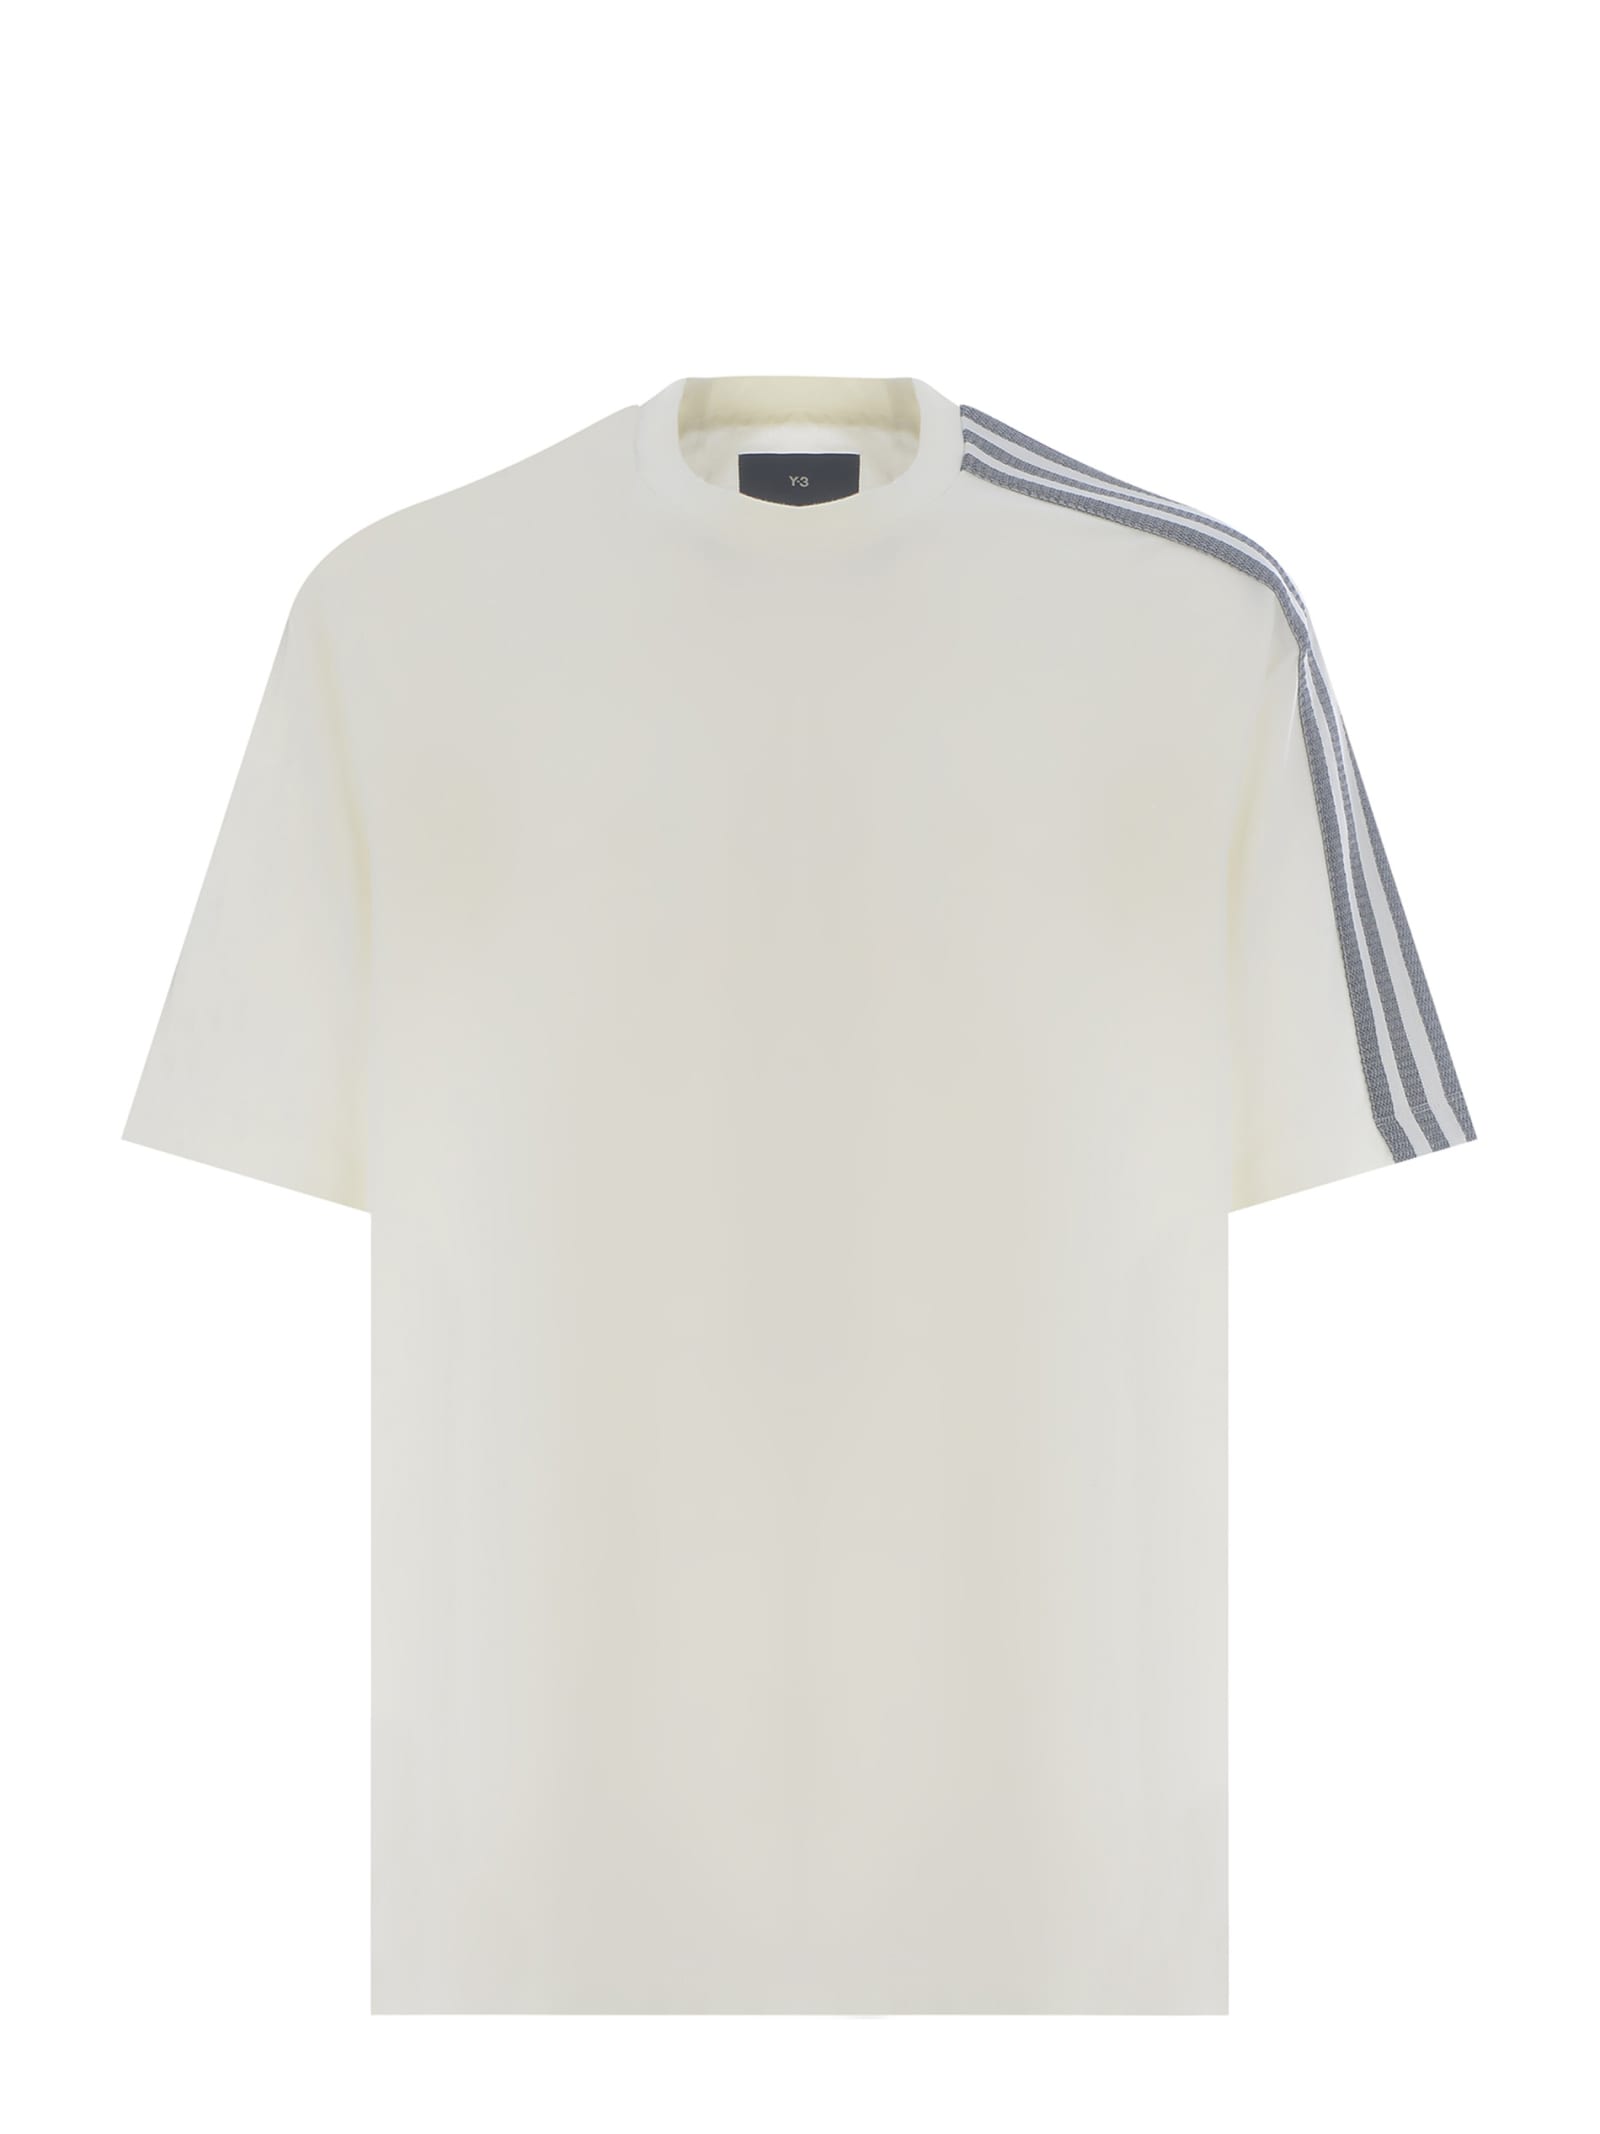 T-shirt Y-3 3-stripes Made Of Cotton